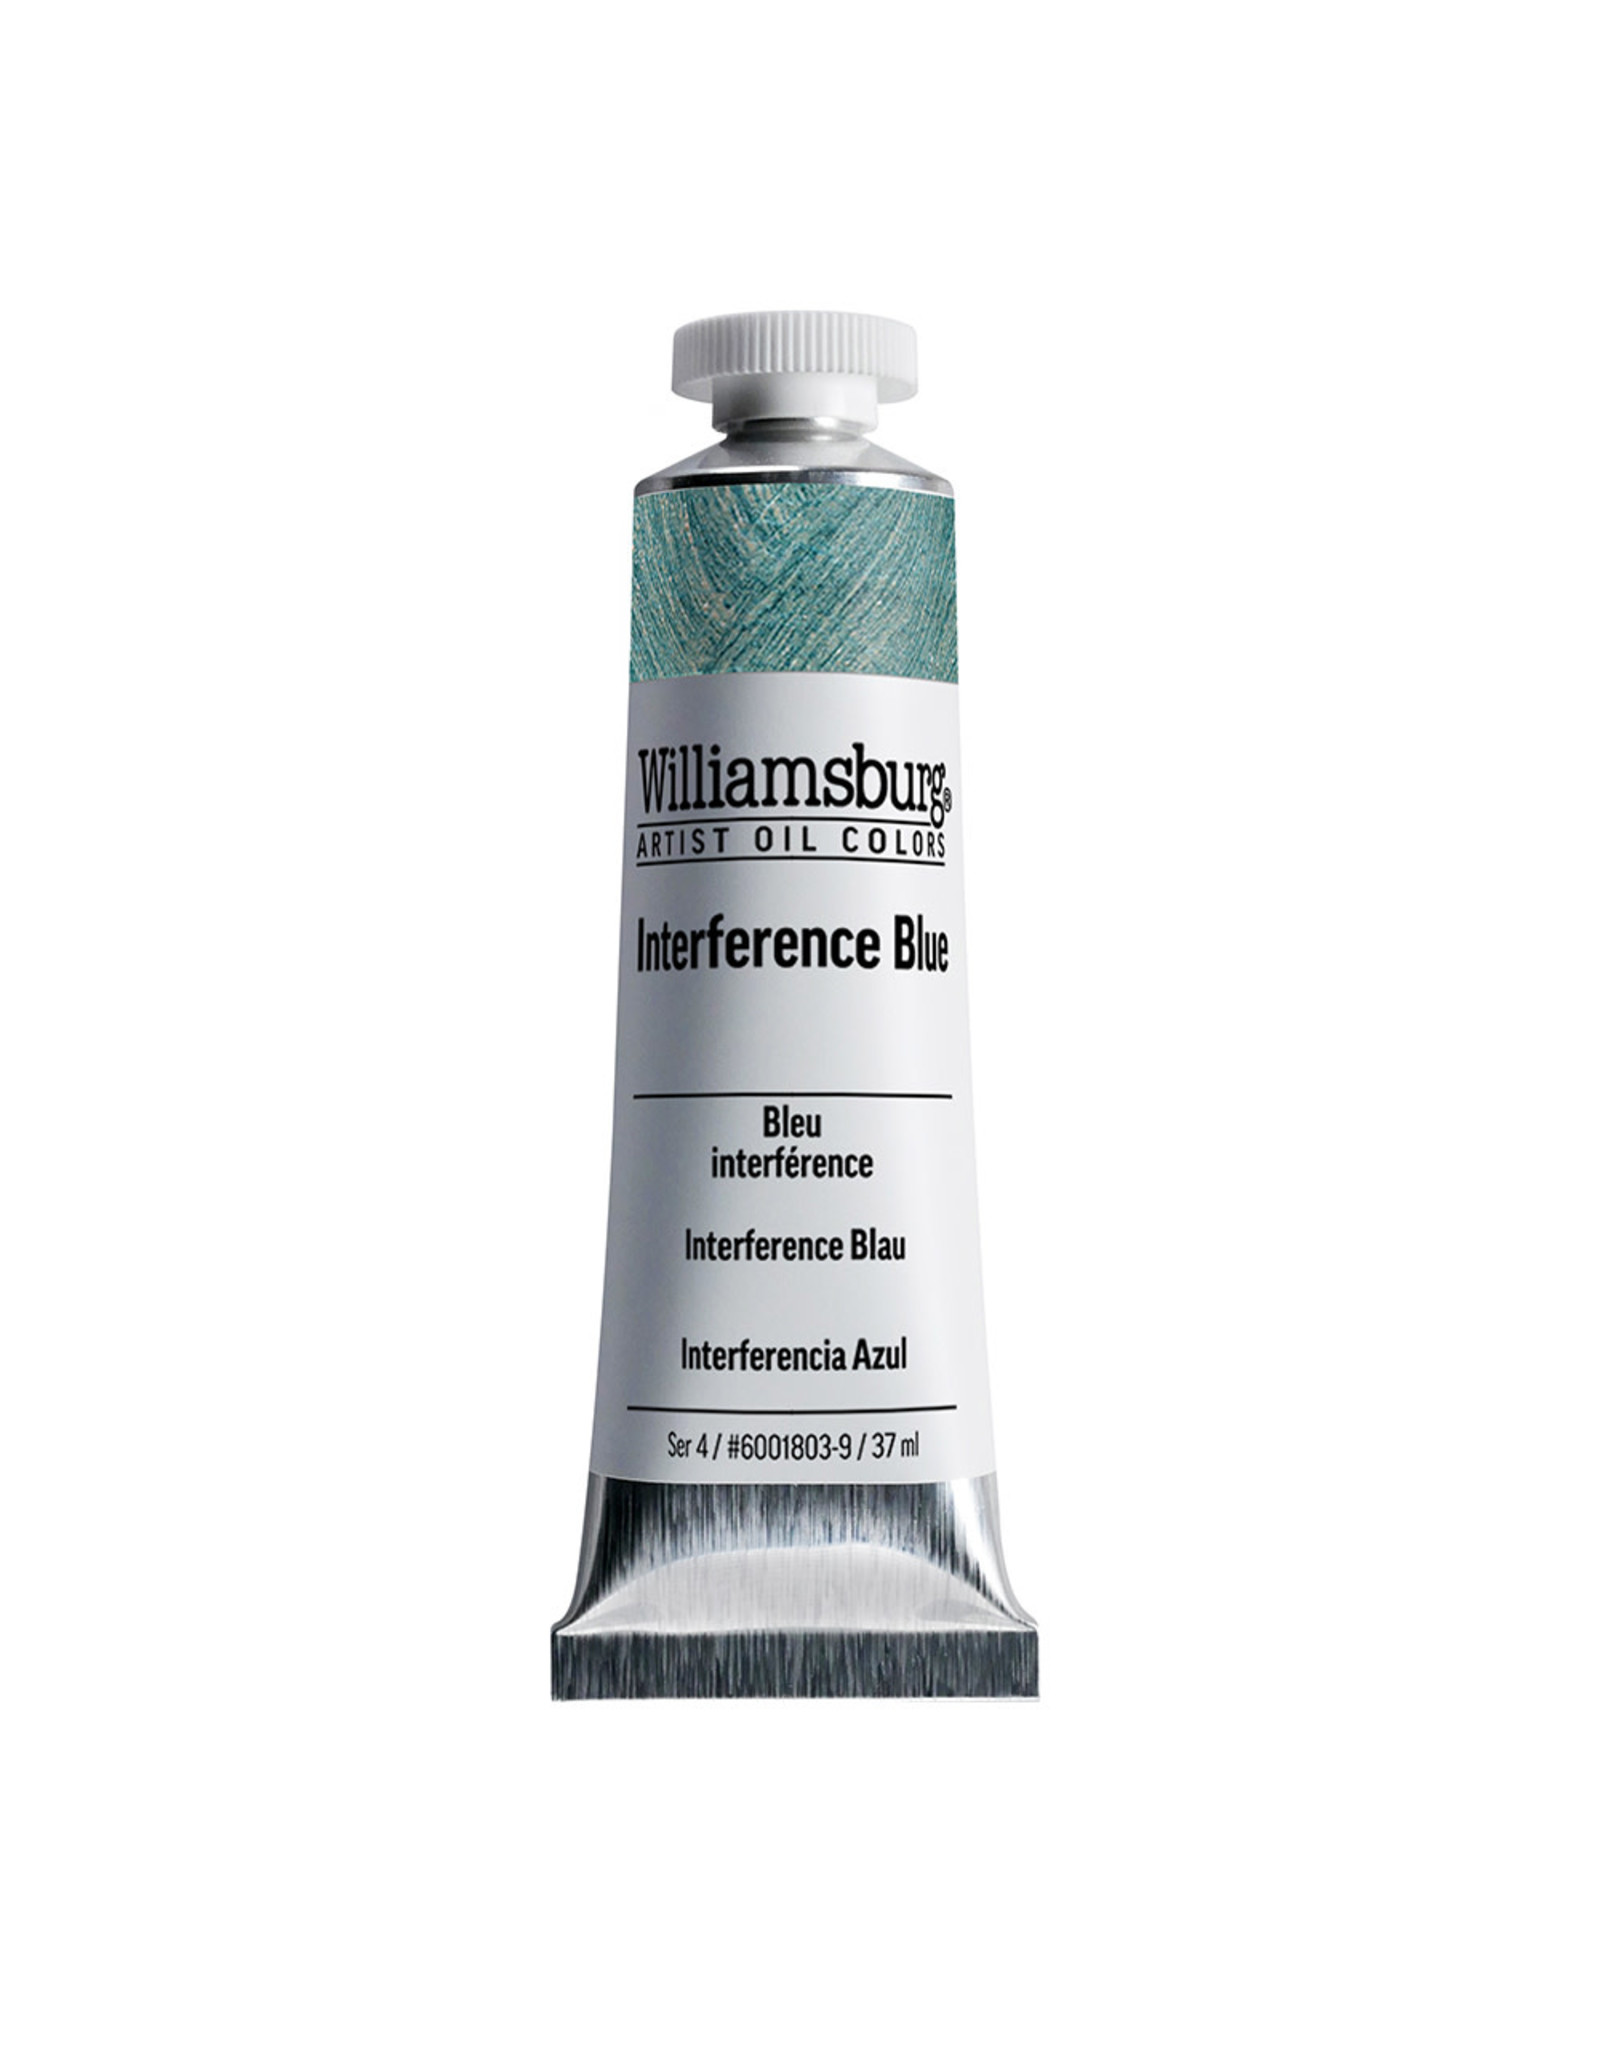 Golden Williamsburg Handmade Oil Colors, Interference Blue 37ml